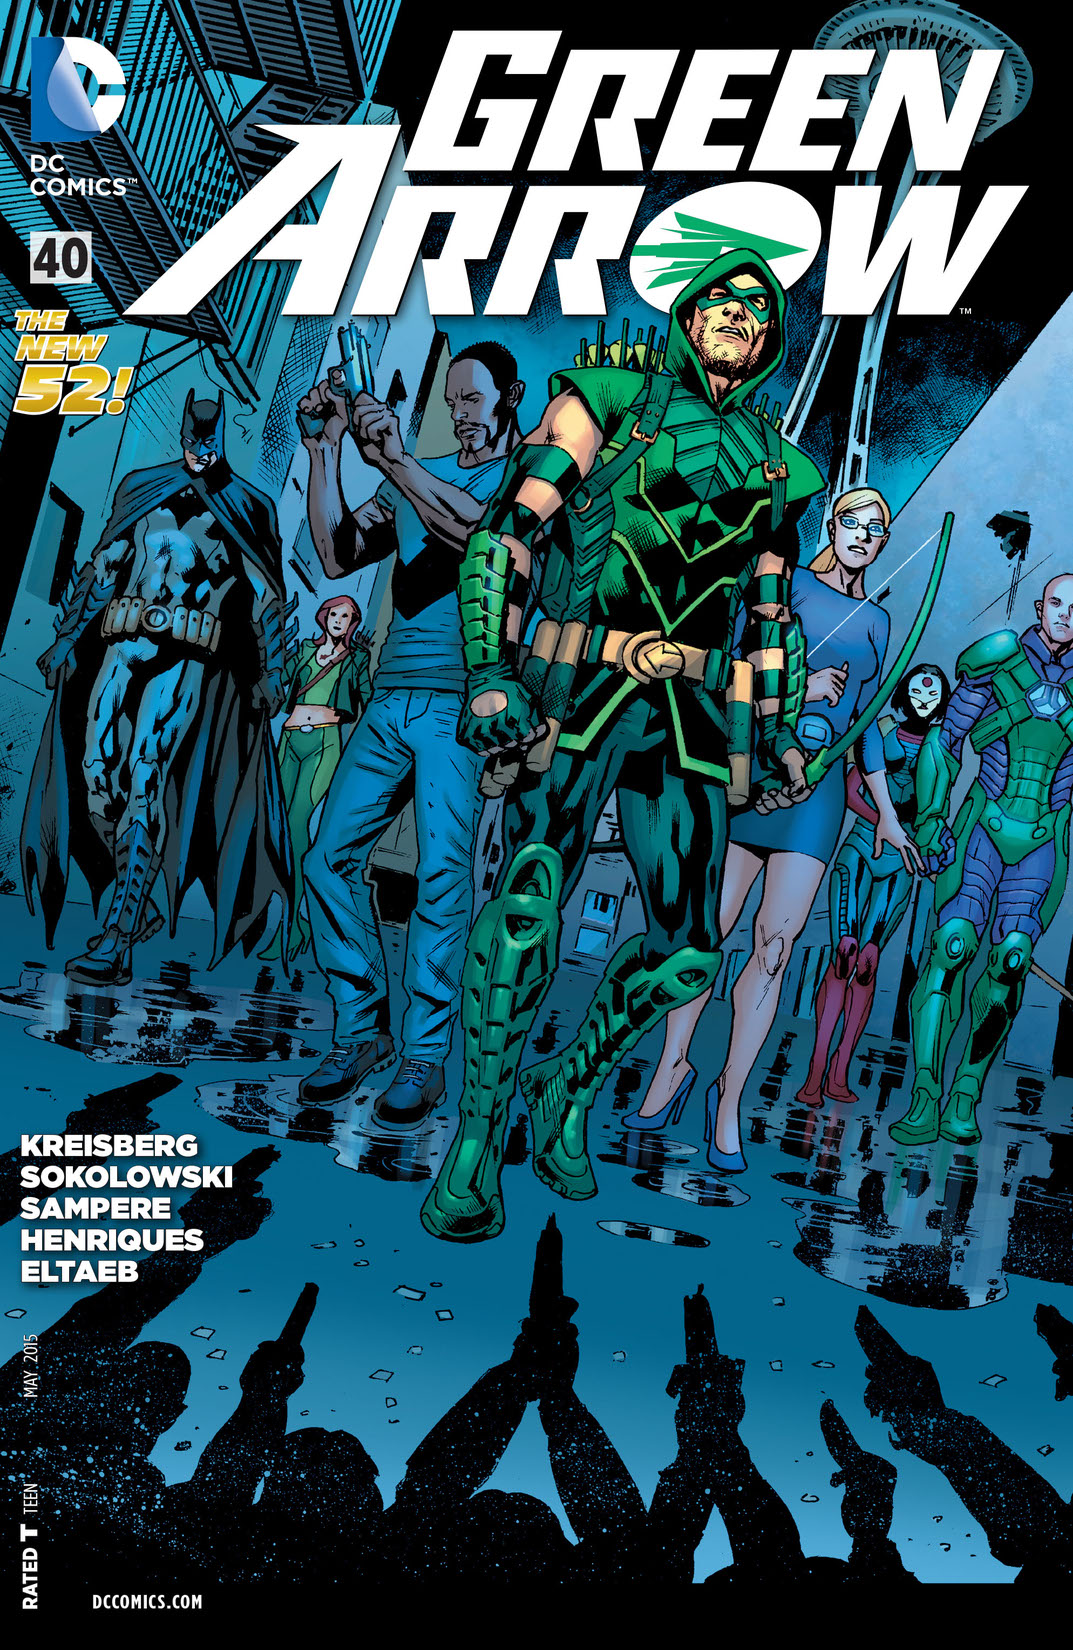 Green Arrow (2011-) #40 preview images